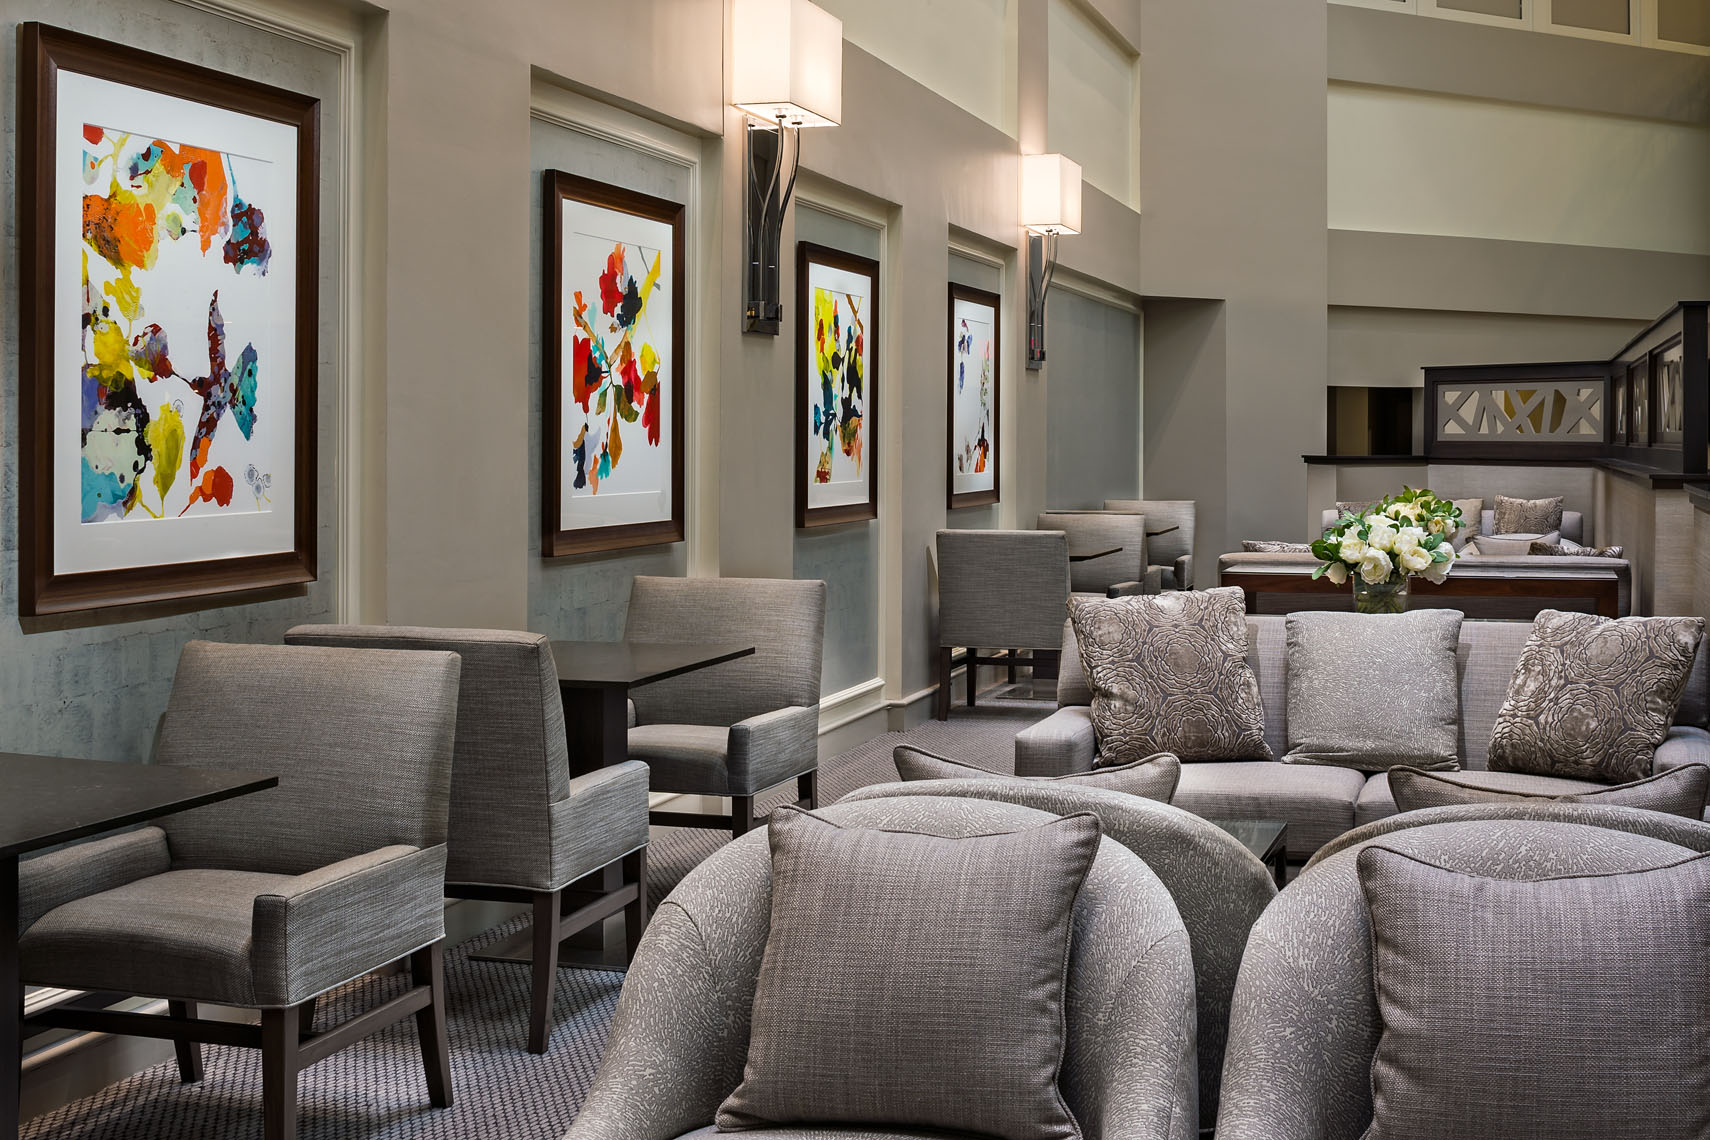 Interior photograph of a luxury hotel resort by Charleston Beaufort South Carolina based architectural hotel and resort photographer Richard Steinberger